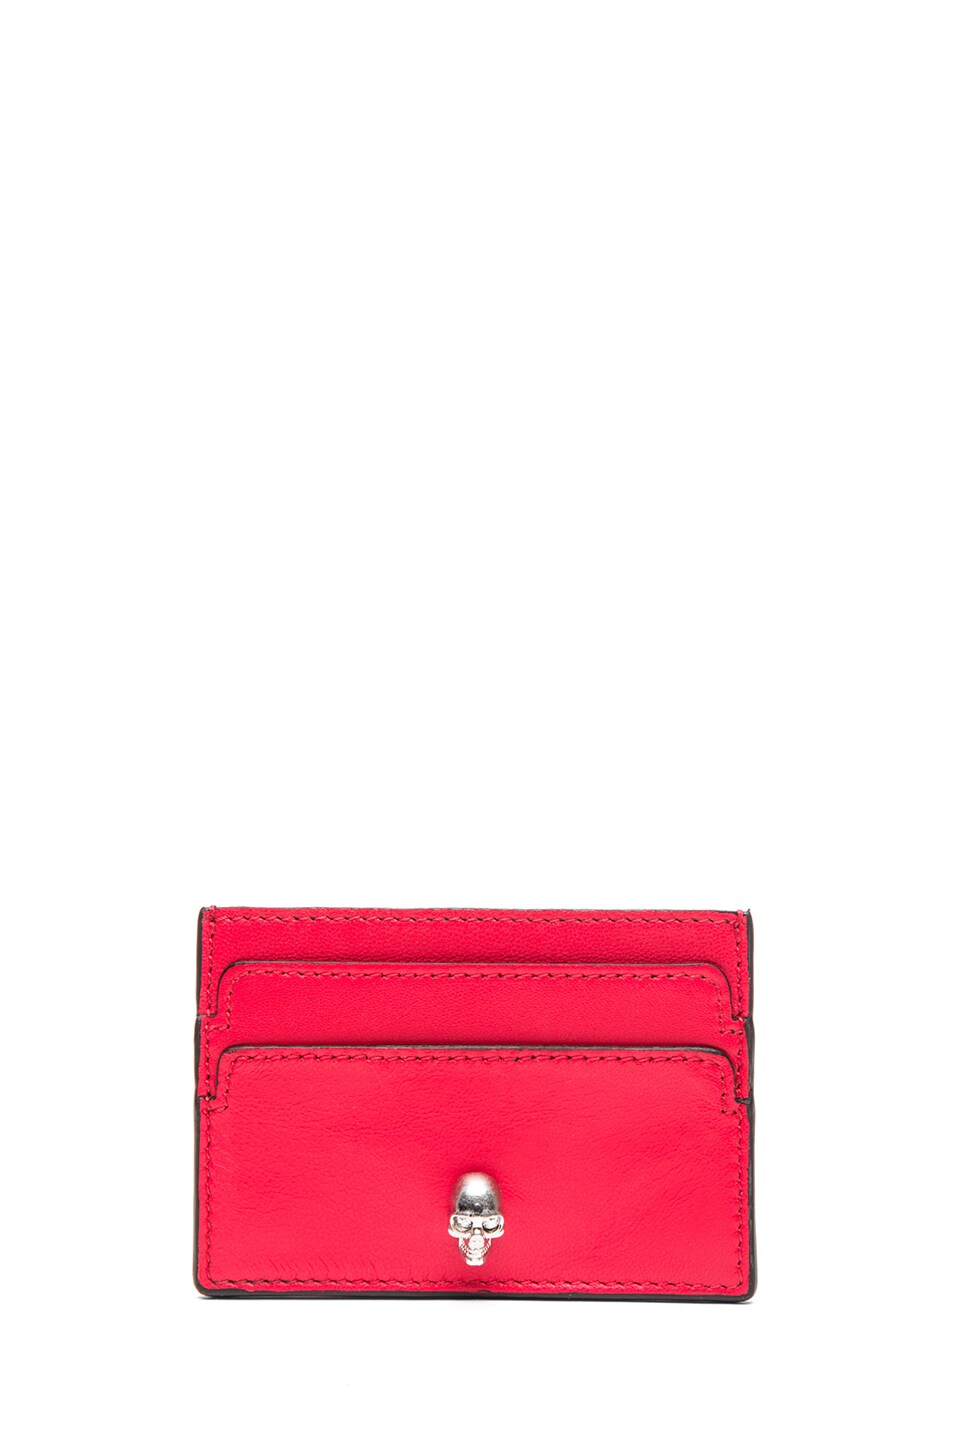 Image 1 of Alexander McQueen Card Holder in Shiny Red